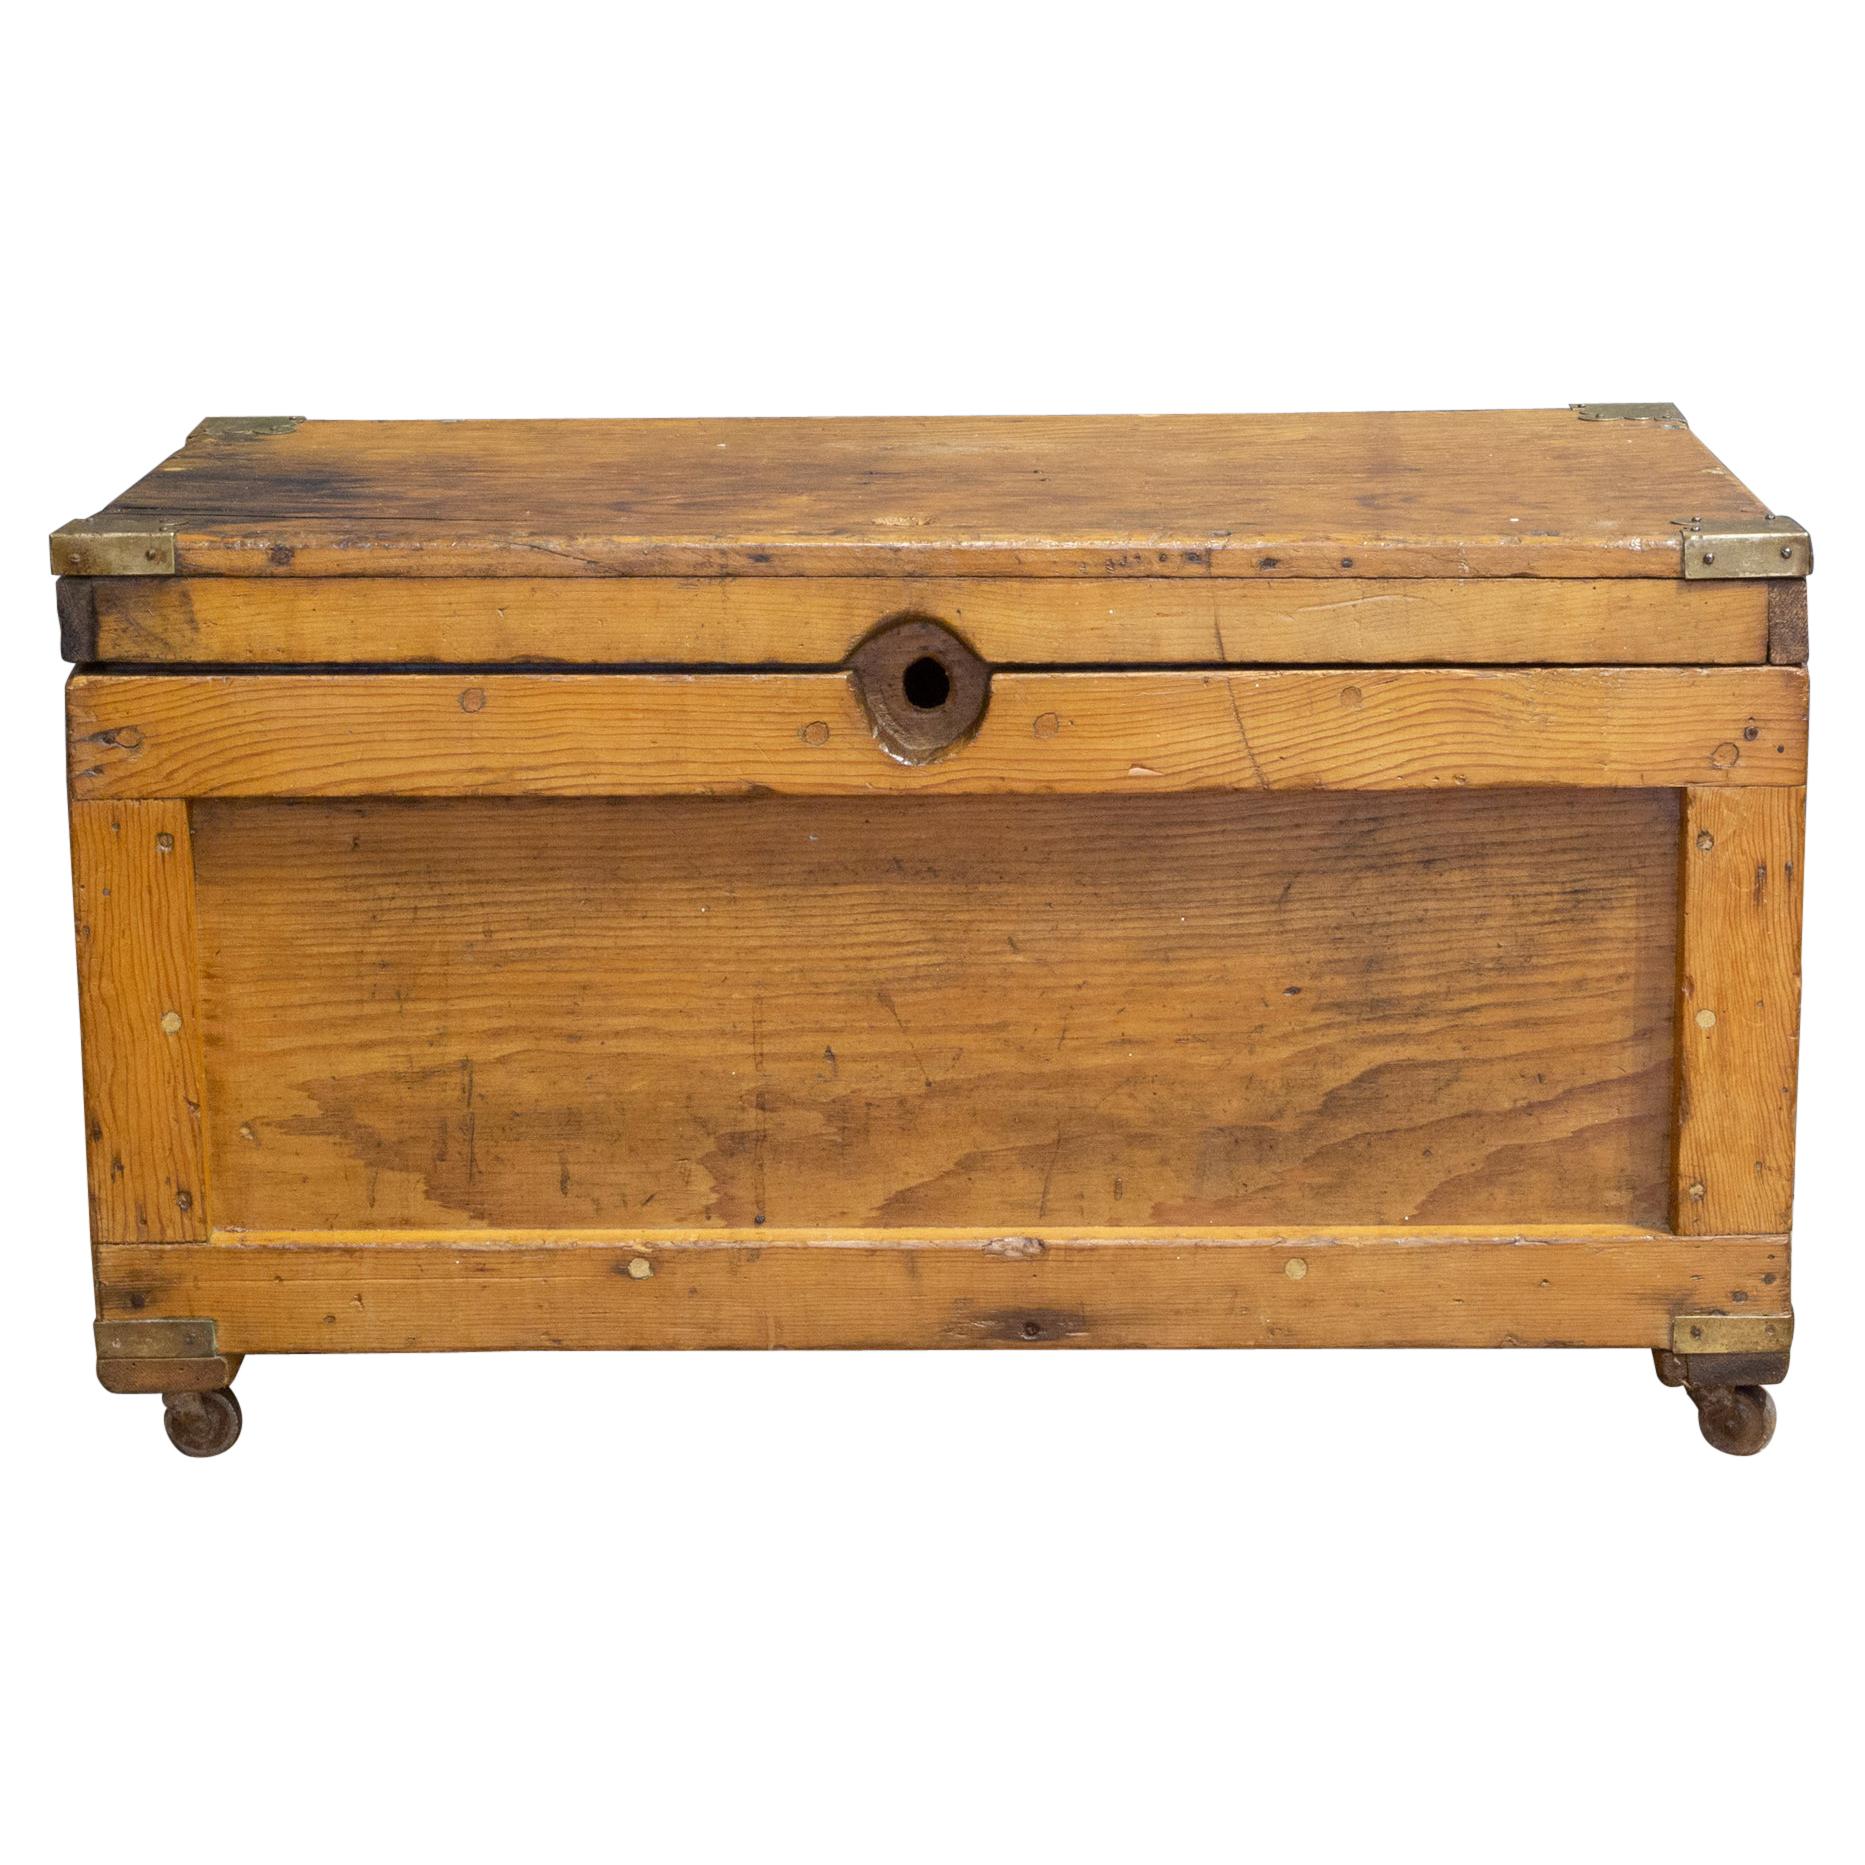 Early 20th C Oak Chest with Brass Corners, c.1940